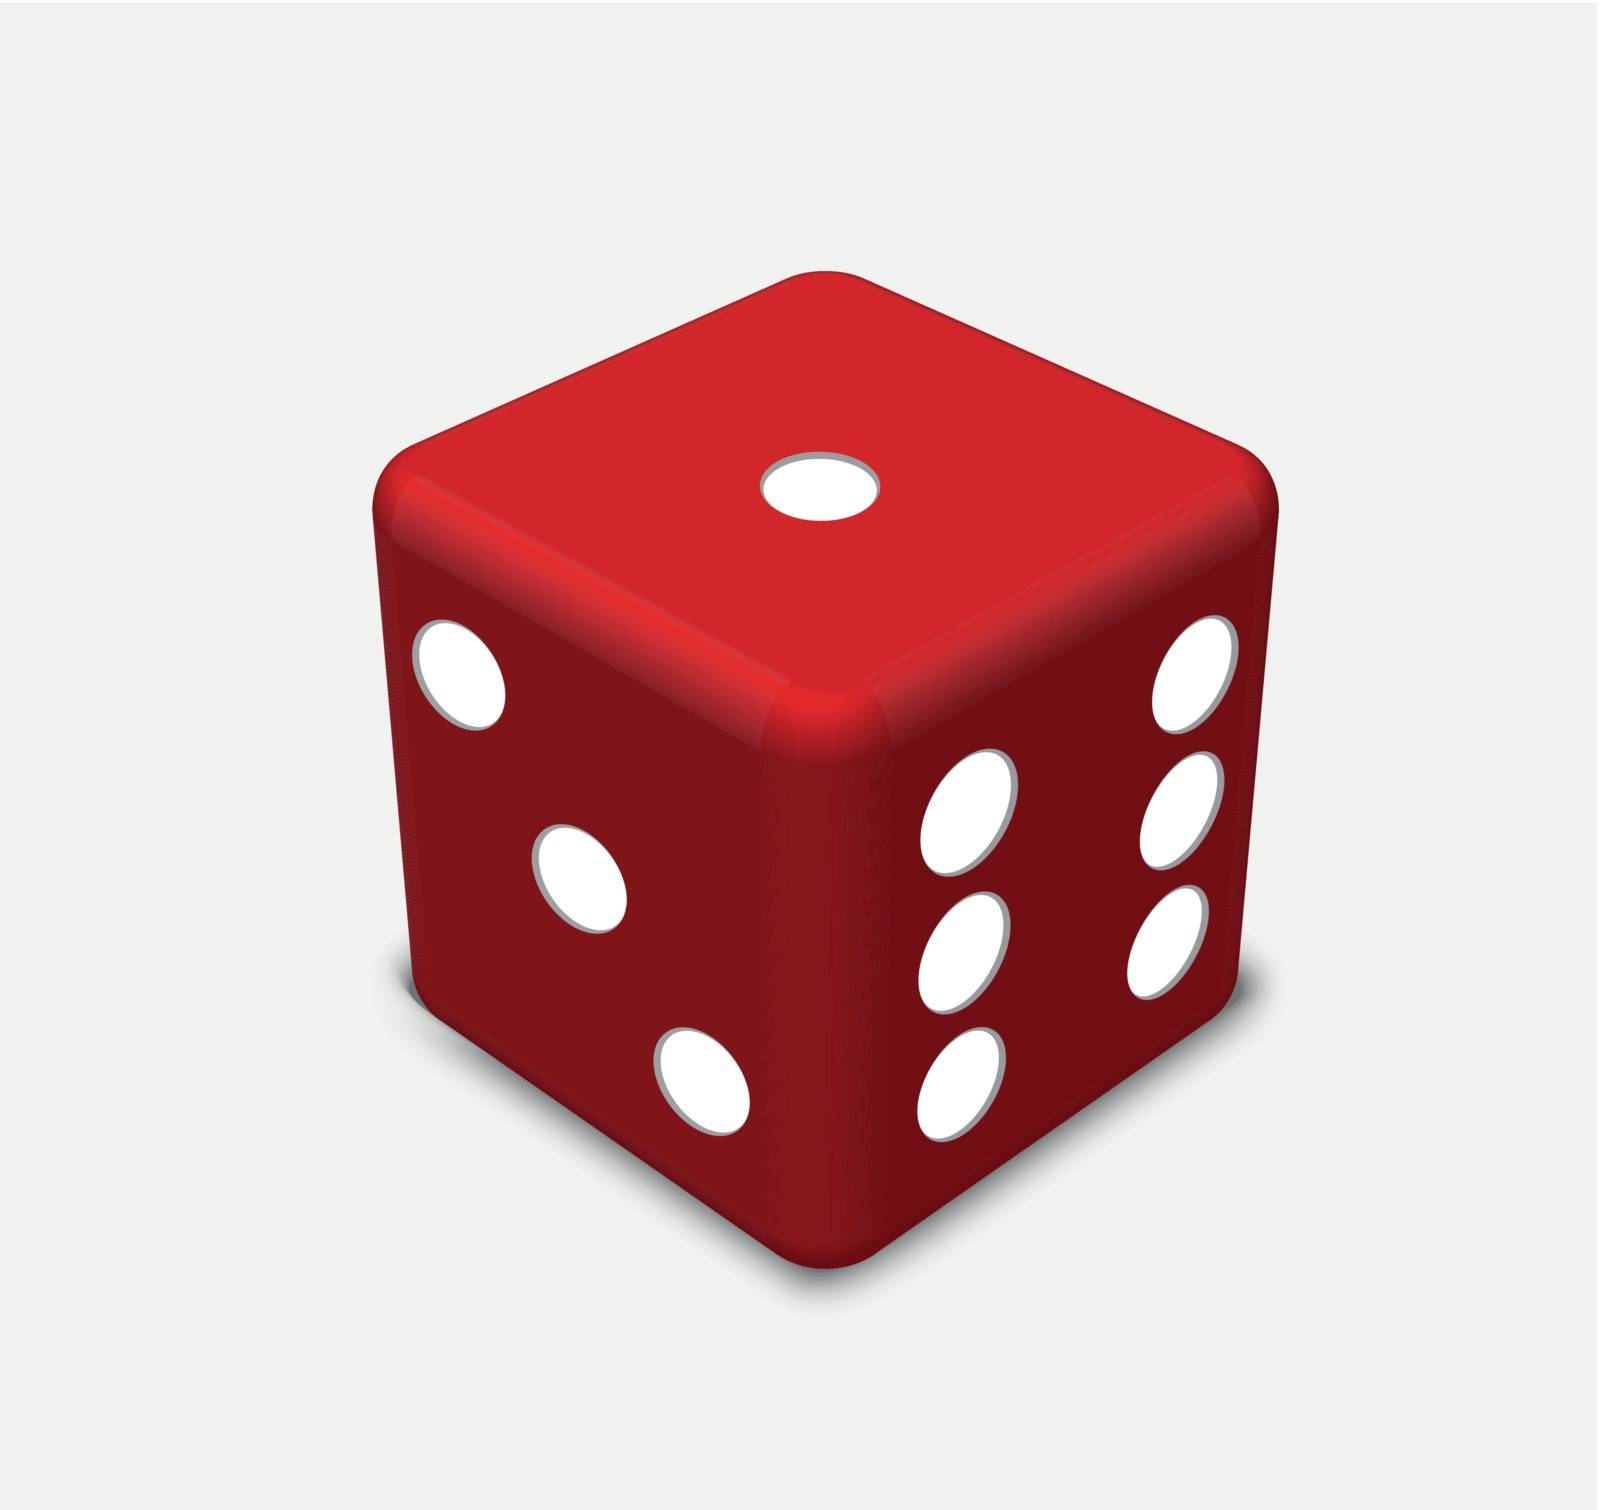 red dice by Istanbul2009